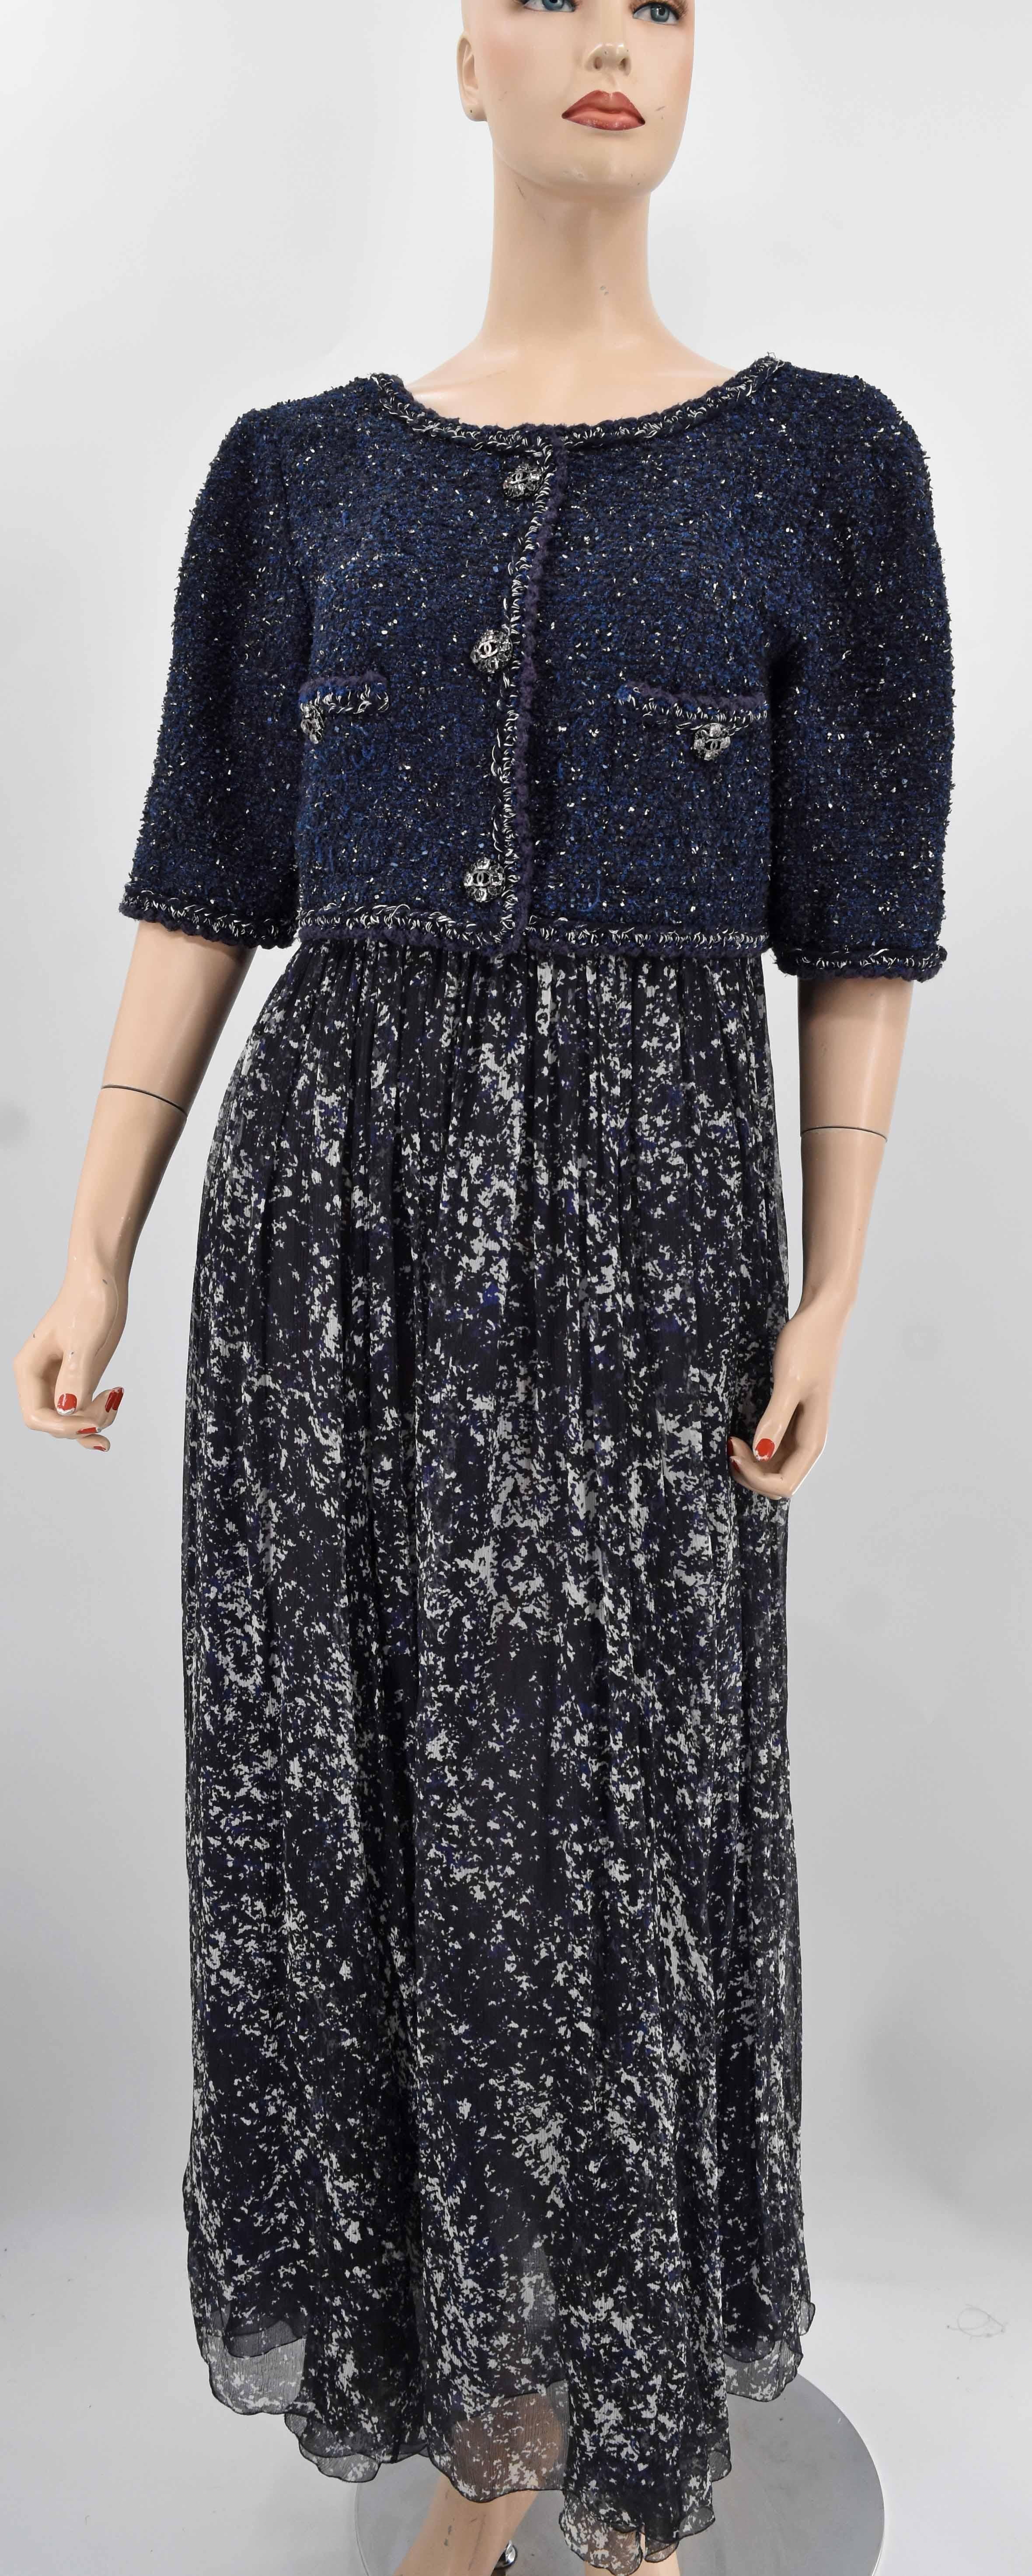 Chanel braided trim maxi dress adorned with interlocking CC logo buttons. This is pre-owned in excellent condition. It retails $13,620 before tax. Color is beautiful blend of navy blue and off white.